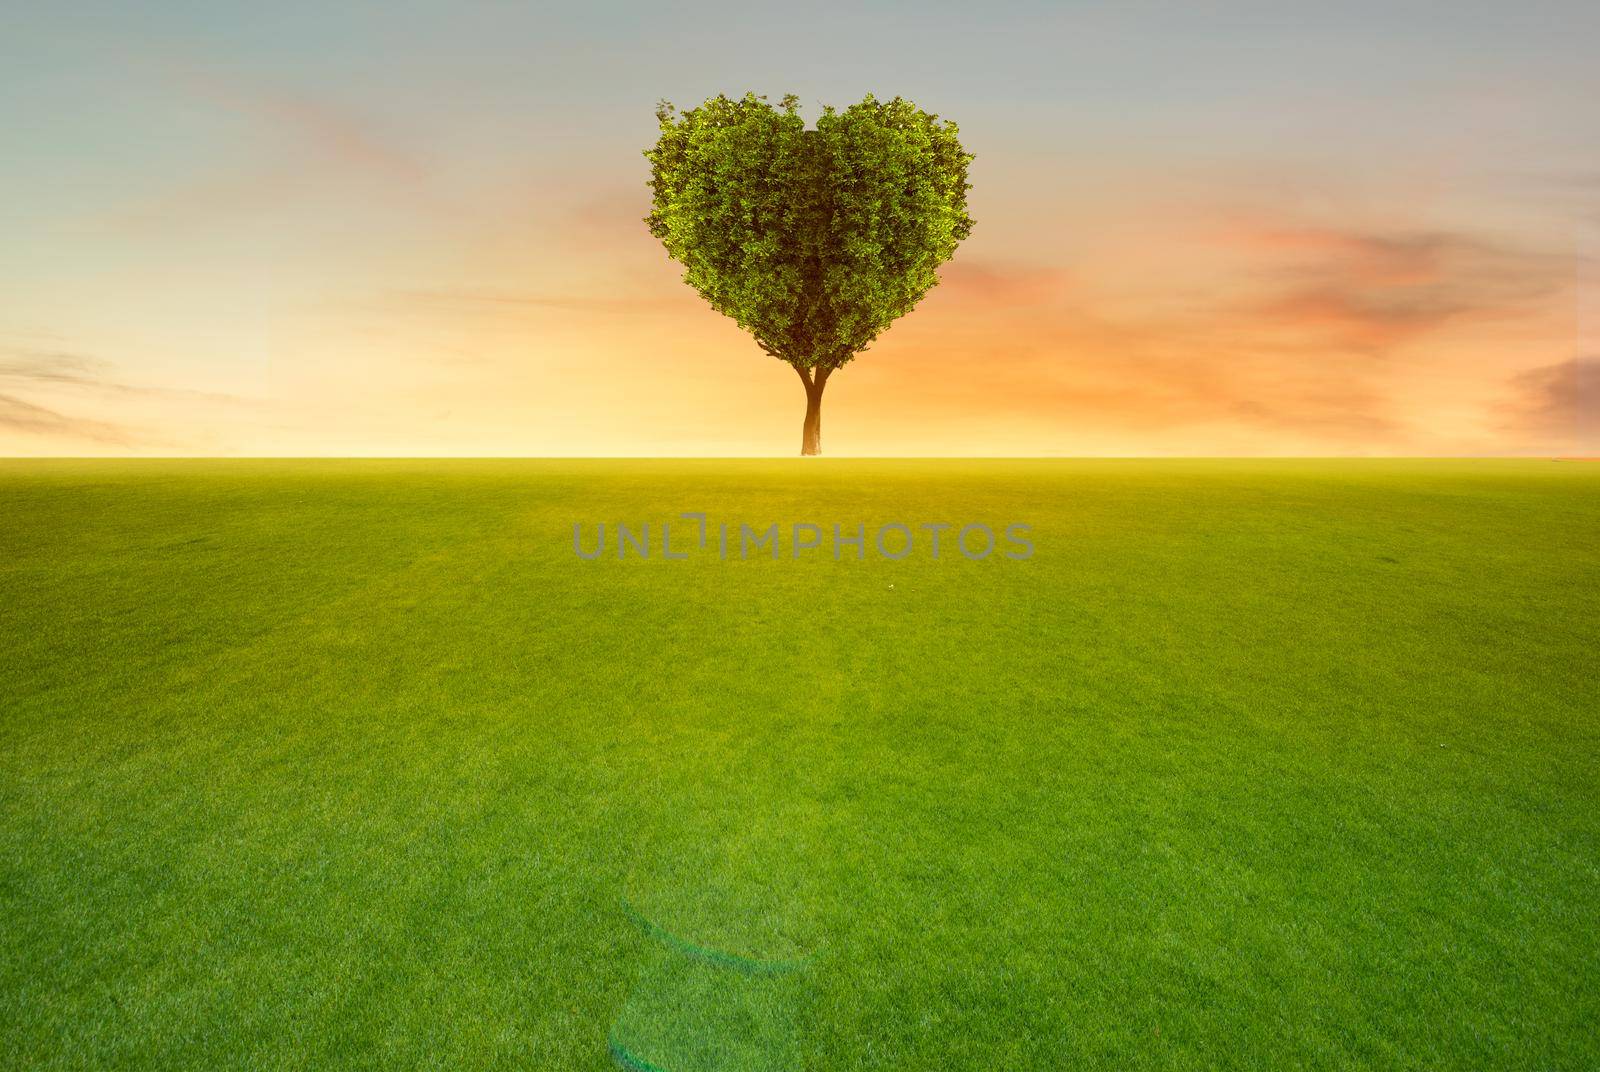 Green field with heart shape tree on sunset background.